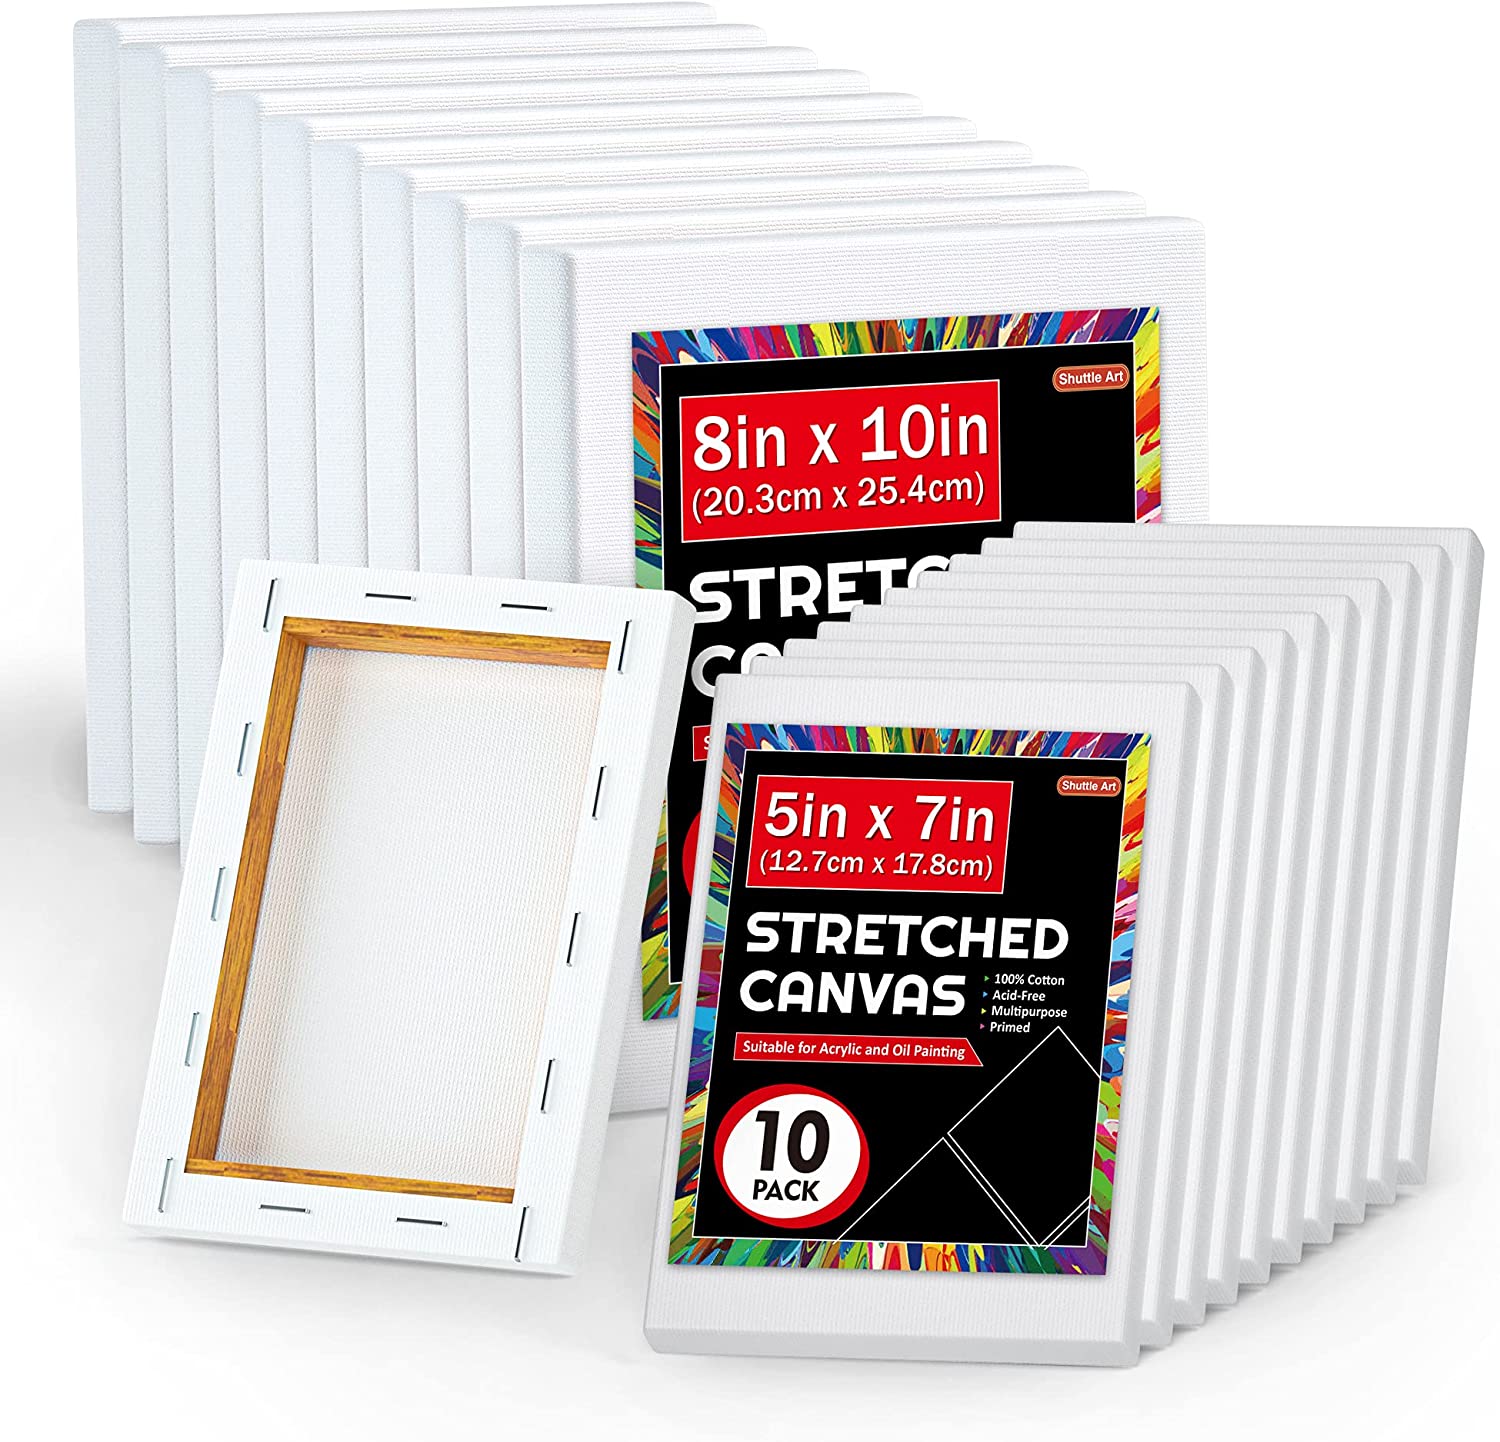 Elan Stretched Canvases 8x8, 6-Pack Canvases for Painting, Painting Canvas Bulk, Stretched Canvas for Adults Blank Canvas for Painting Painting